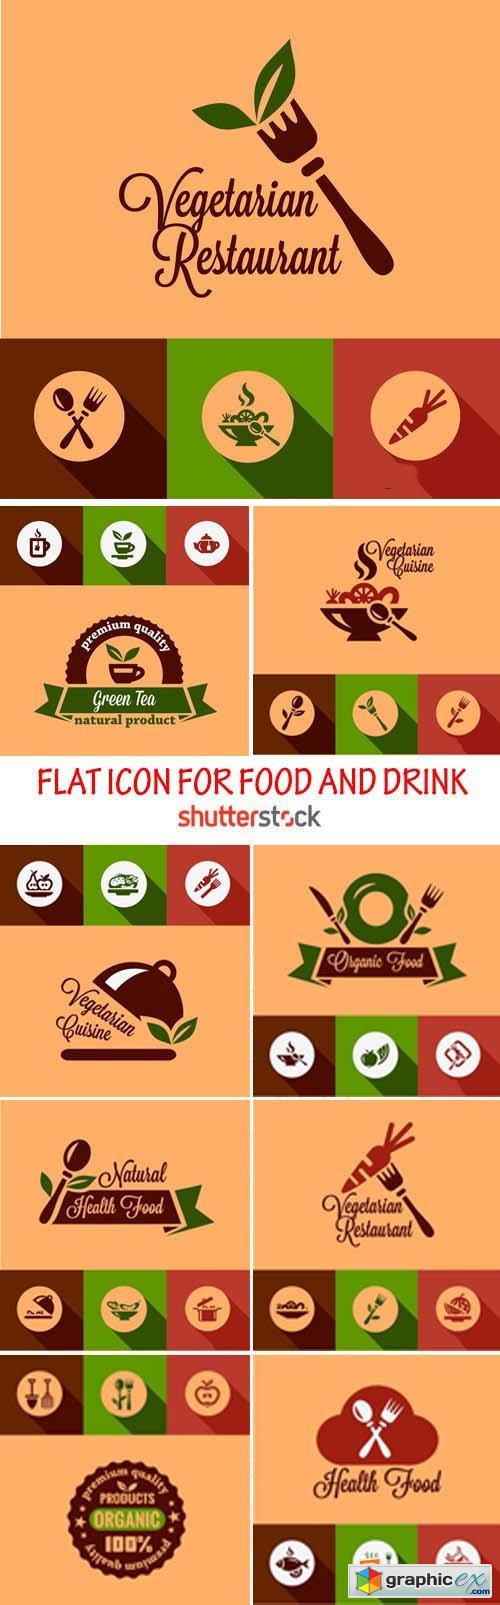 Amazing SS - Flat icons for food and drink, 26xEPS